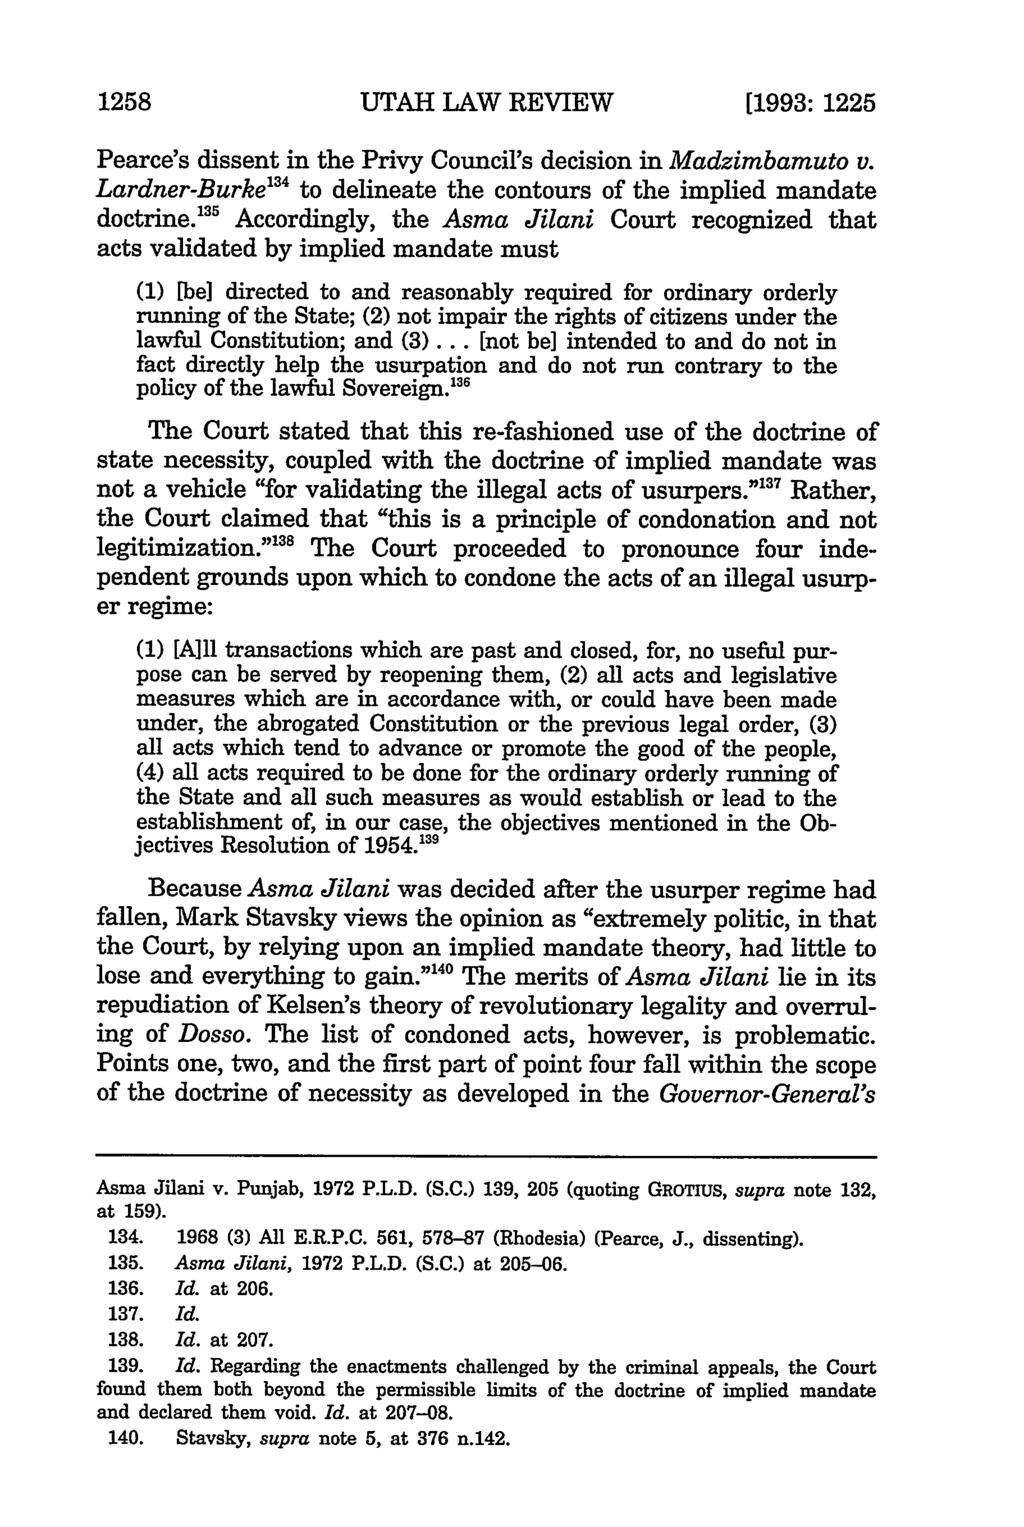 1258 UTAH LAW REVIEW [1993: 1225 Pearce's dissent in the Privy Council's decision in Madzimbamuto v. Lardner-Burke" 4 to delineate the contours of the implied mandate doctrine.